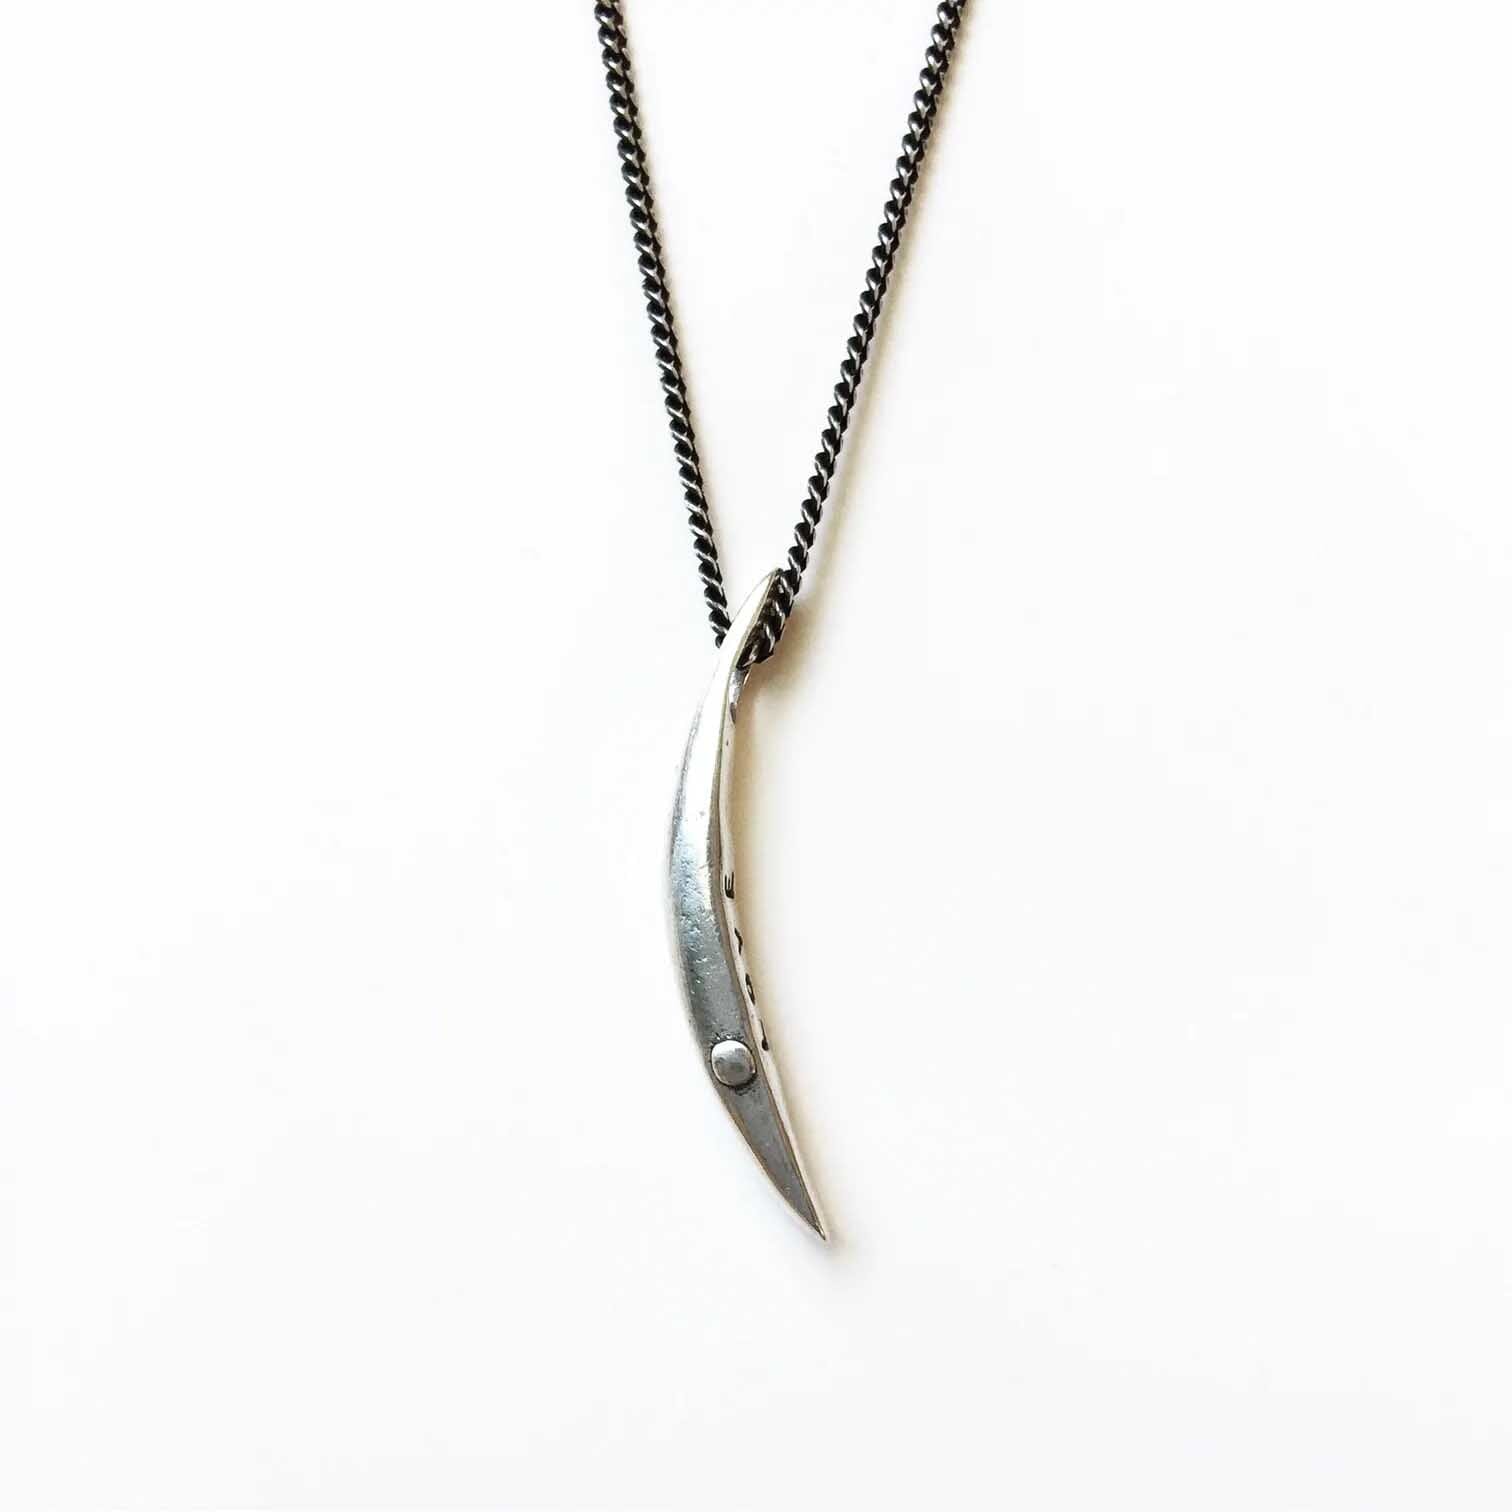 Sliver of a Crescent Moon "Love" Necklace in silver